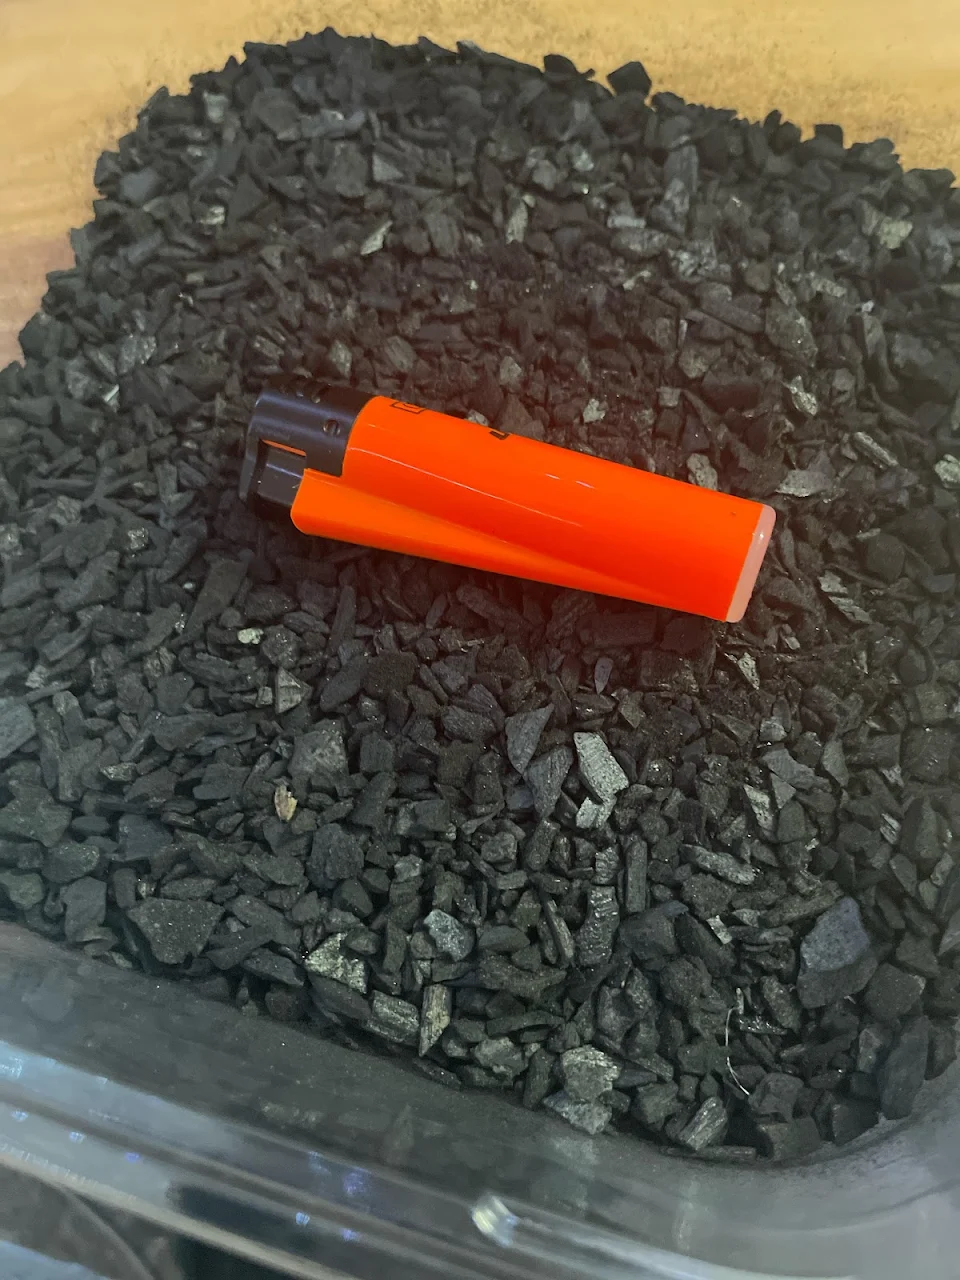 Is this charcoal big enough for springtail cultures? Lighter for reference